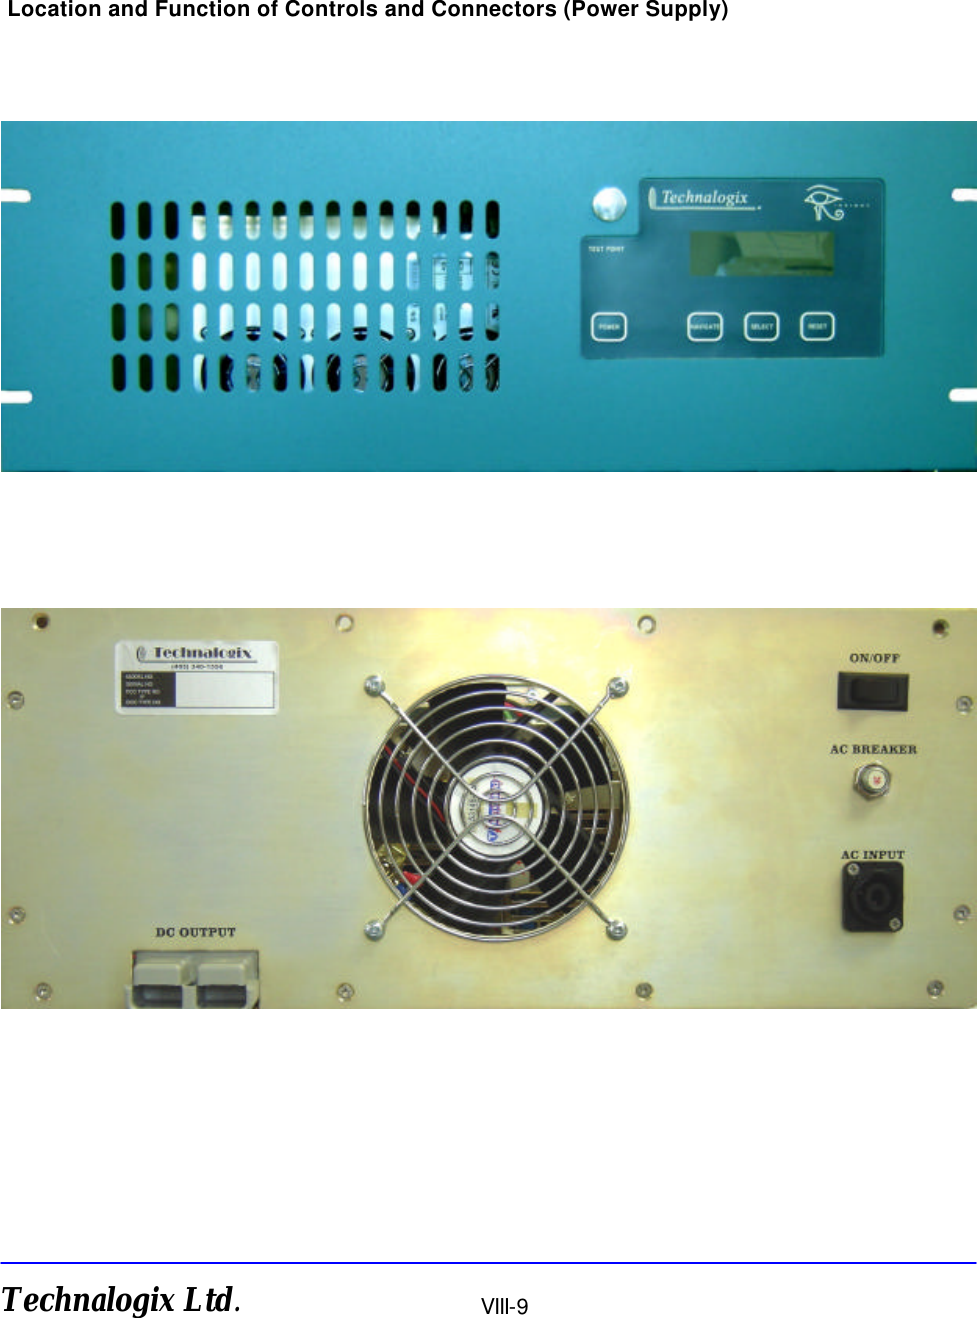  Technalogix Ltd.                                                  VIII-9  Location and Function of Controls and Connectors (Power Supply)                    